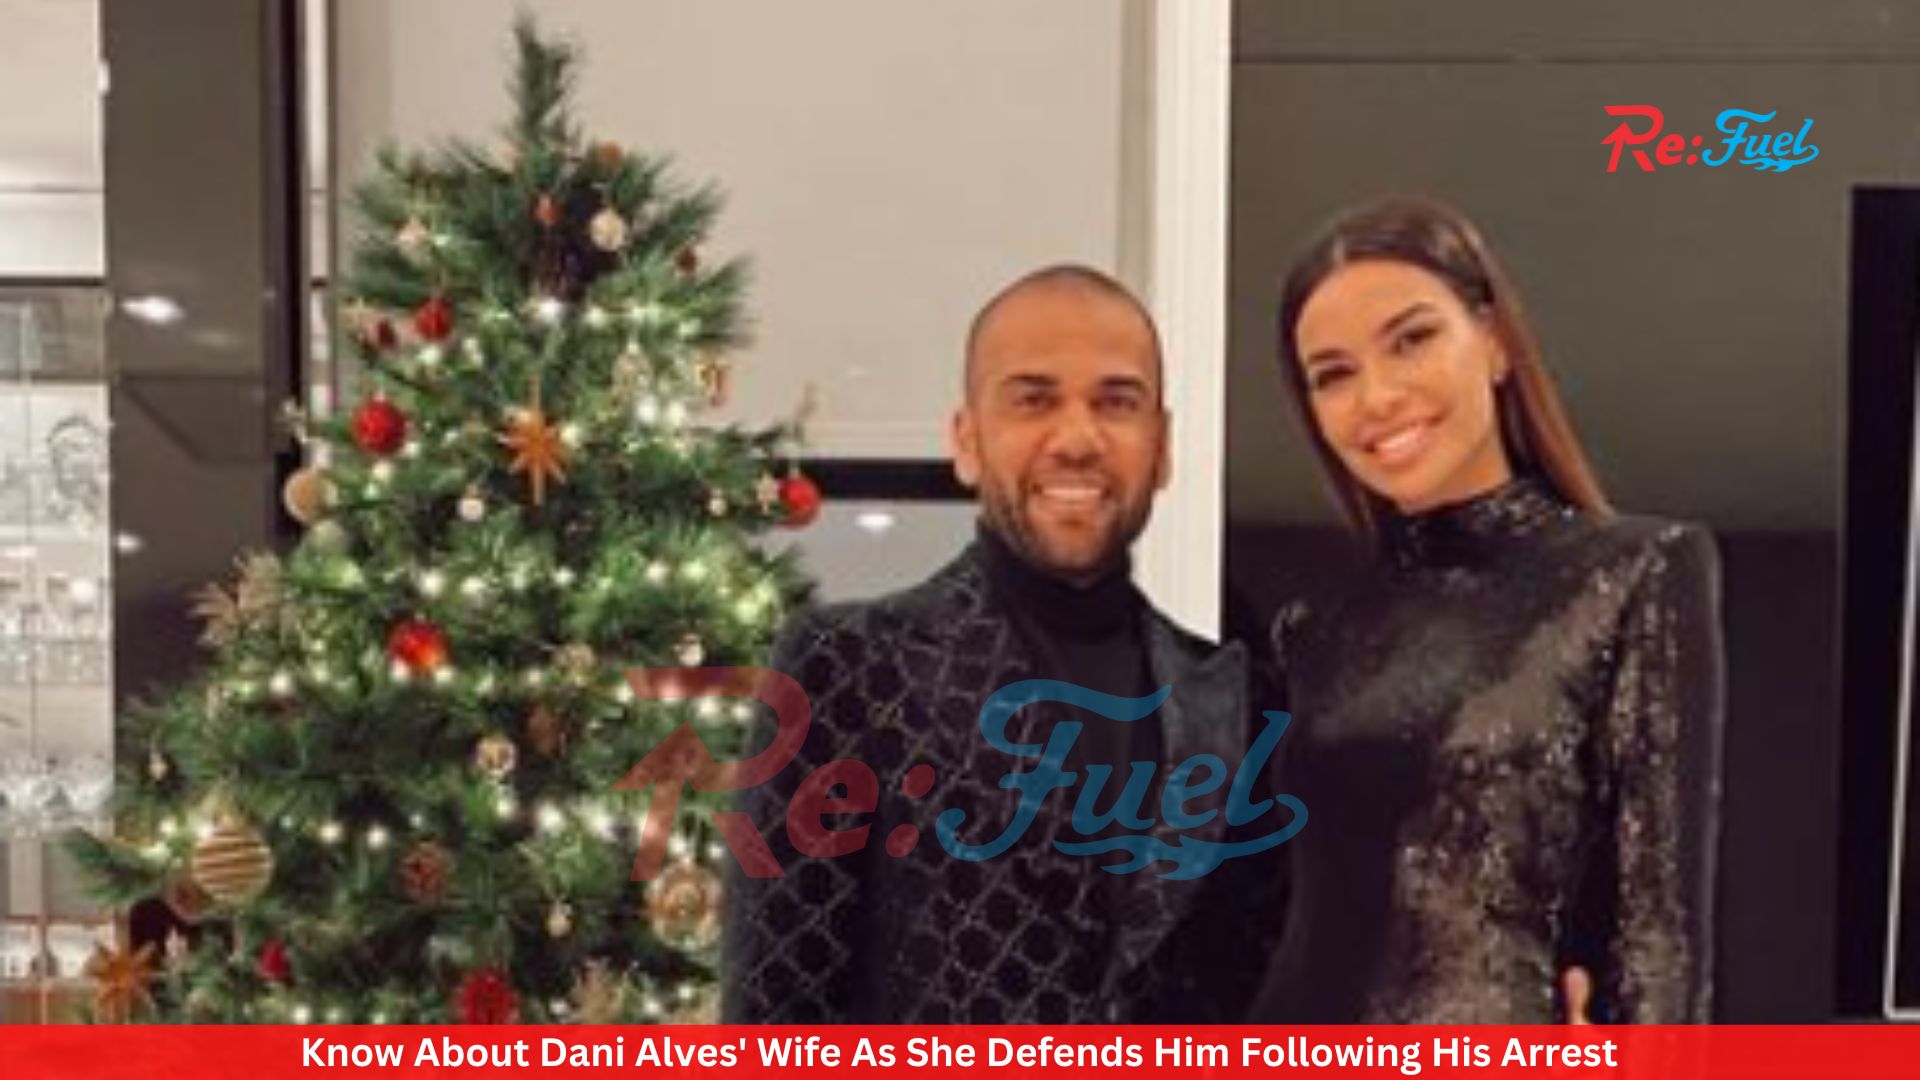 Know About Dani Alves' Wife As She Defends Him Following His Arrest